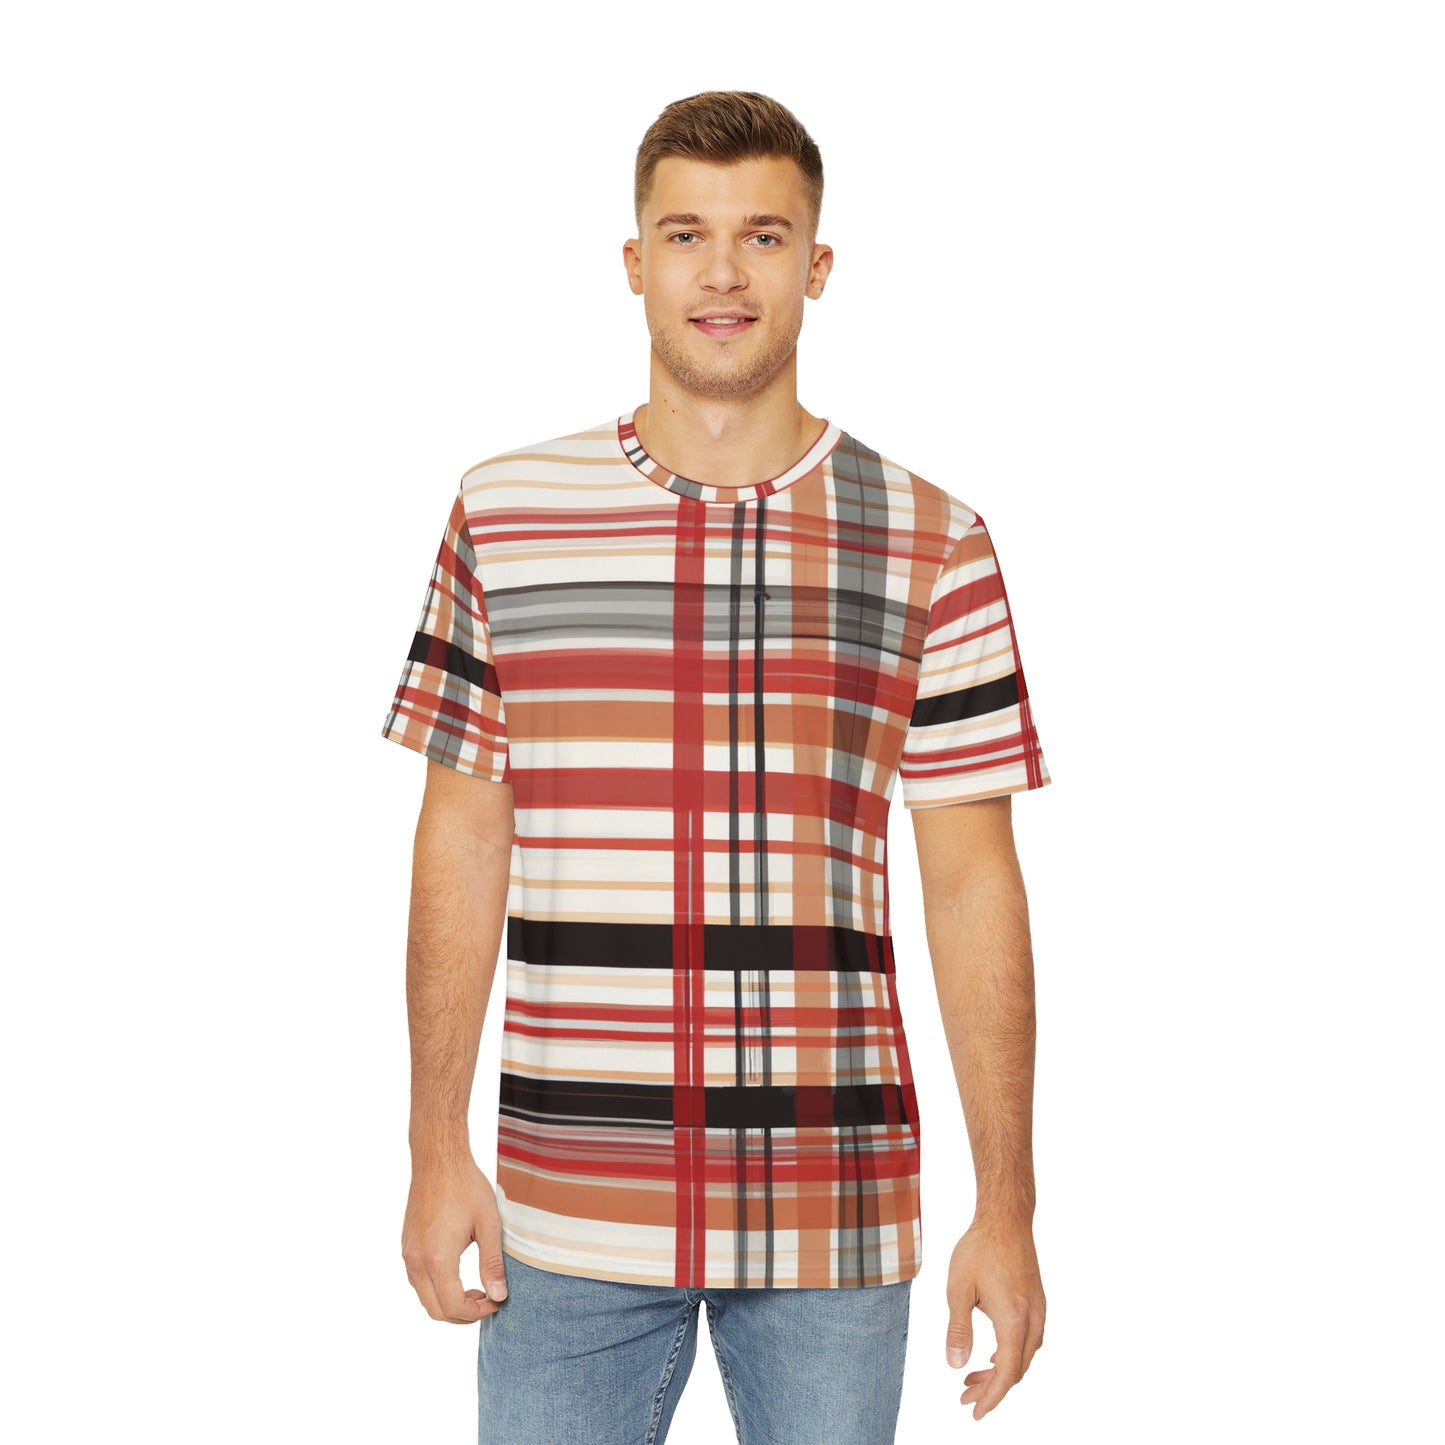 Front view of the Maestro Kaleidoscope Crewneck Pullover All-Over Print Short-Sleeved Shirt black red white plaid pattern paired with casual denim pants worn by white man